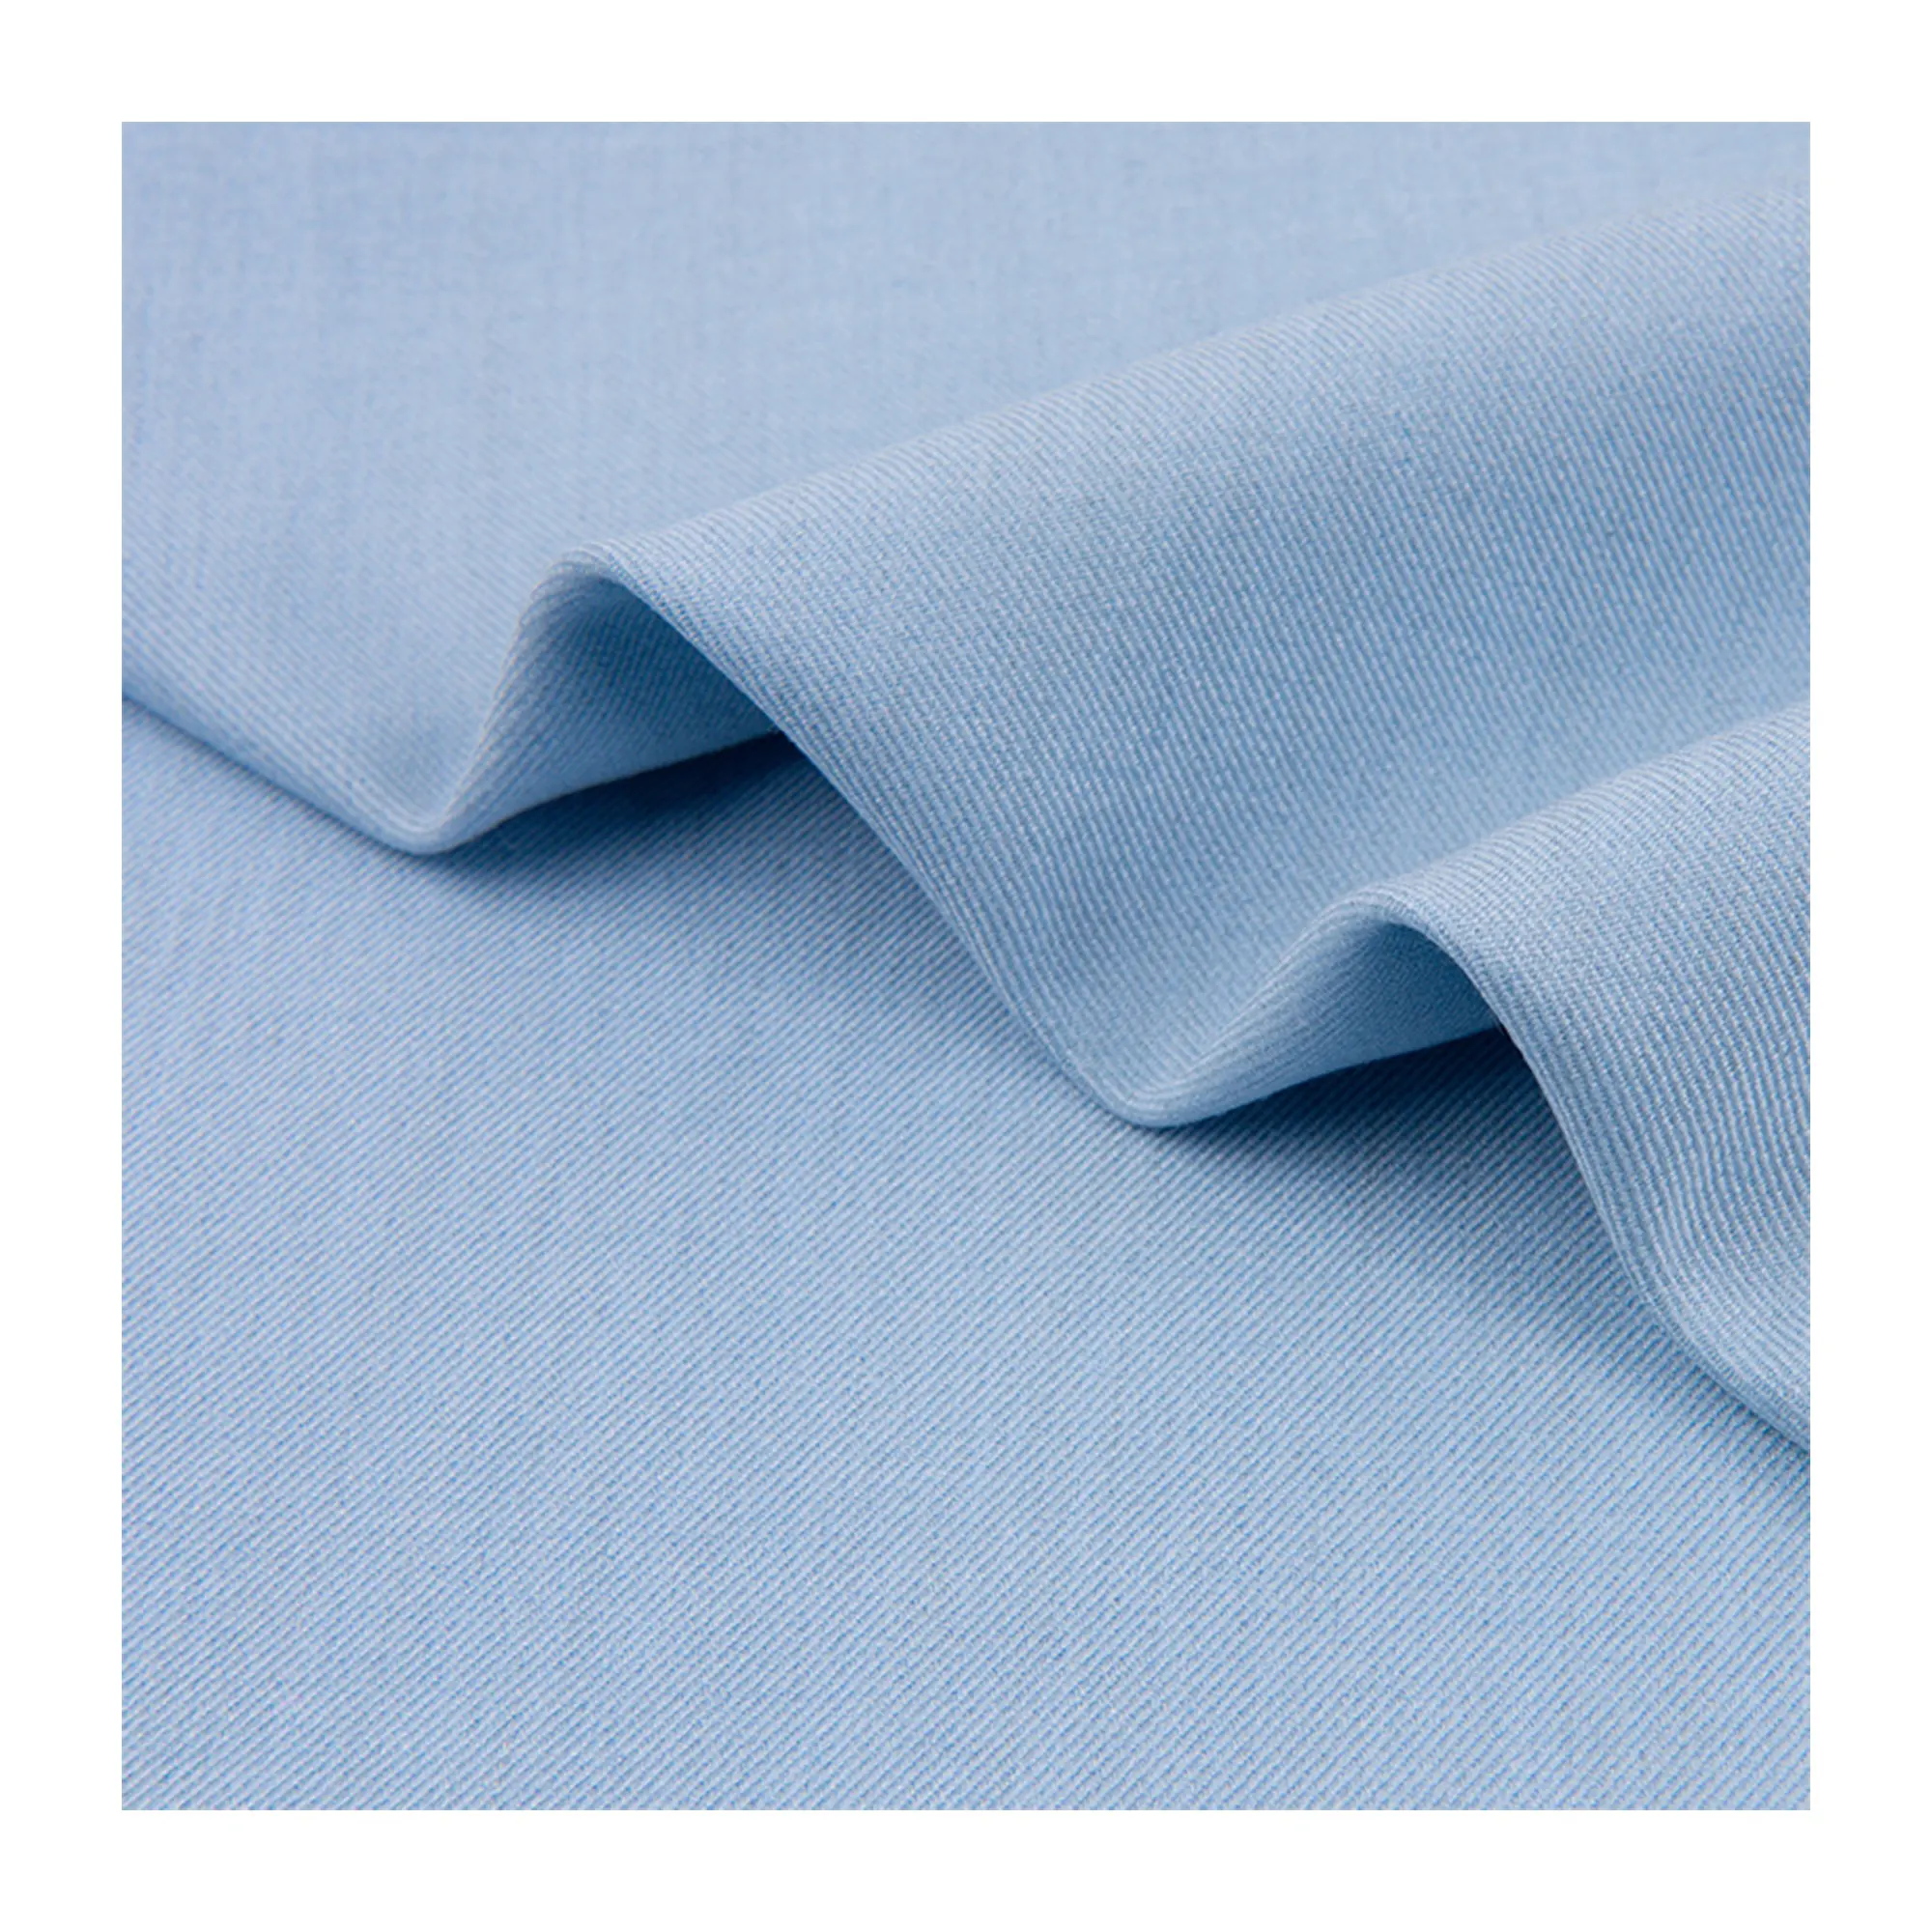 TR 80% Polyester 20% Viscose Material Fabric Polyviscose Fabric Used For Trouser Robe Gown and Uniform